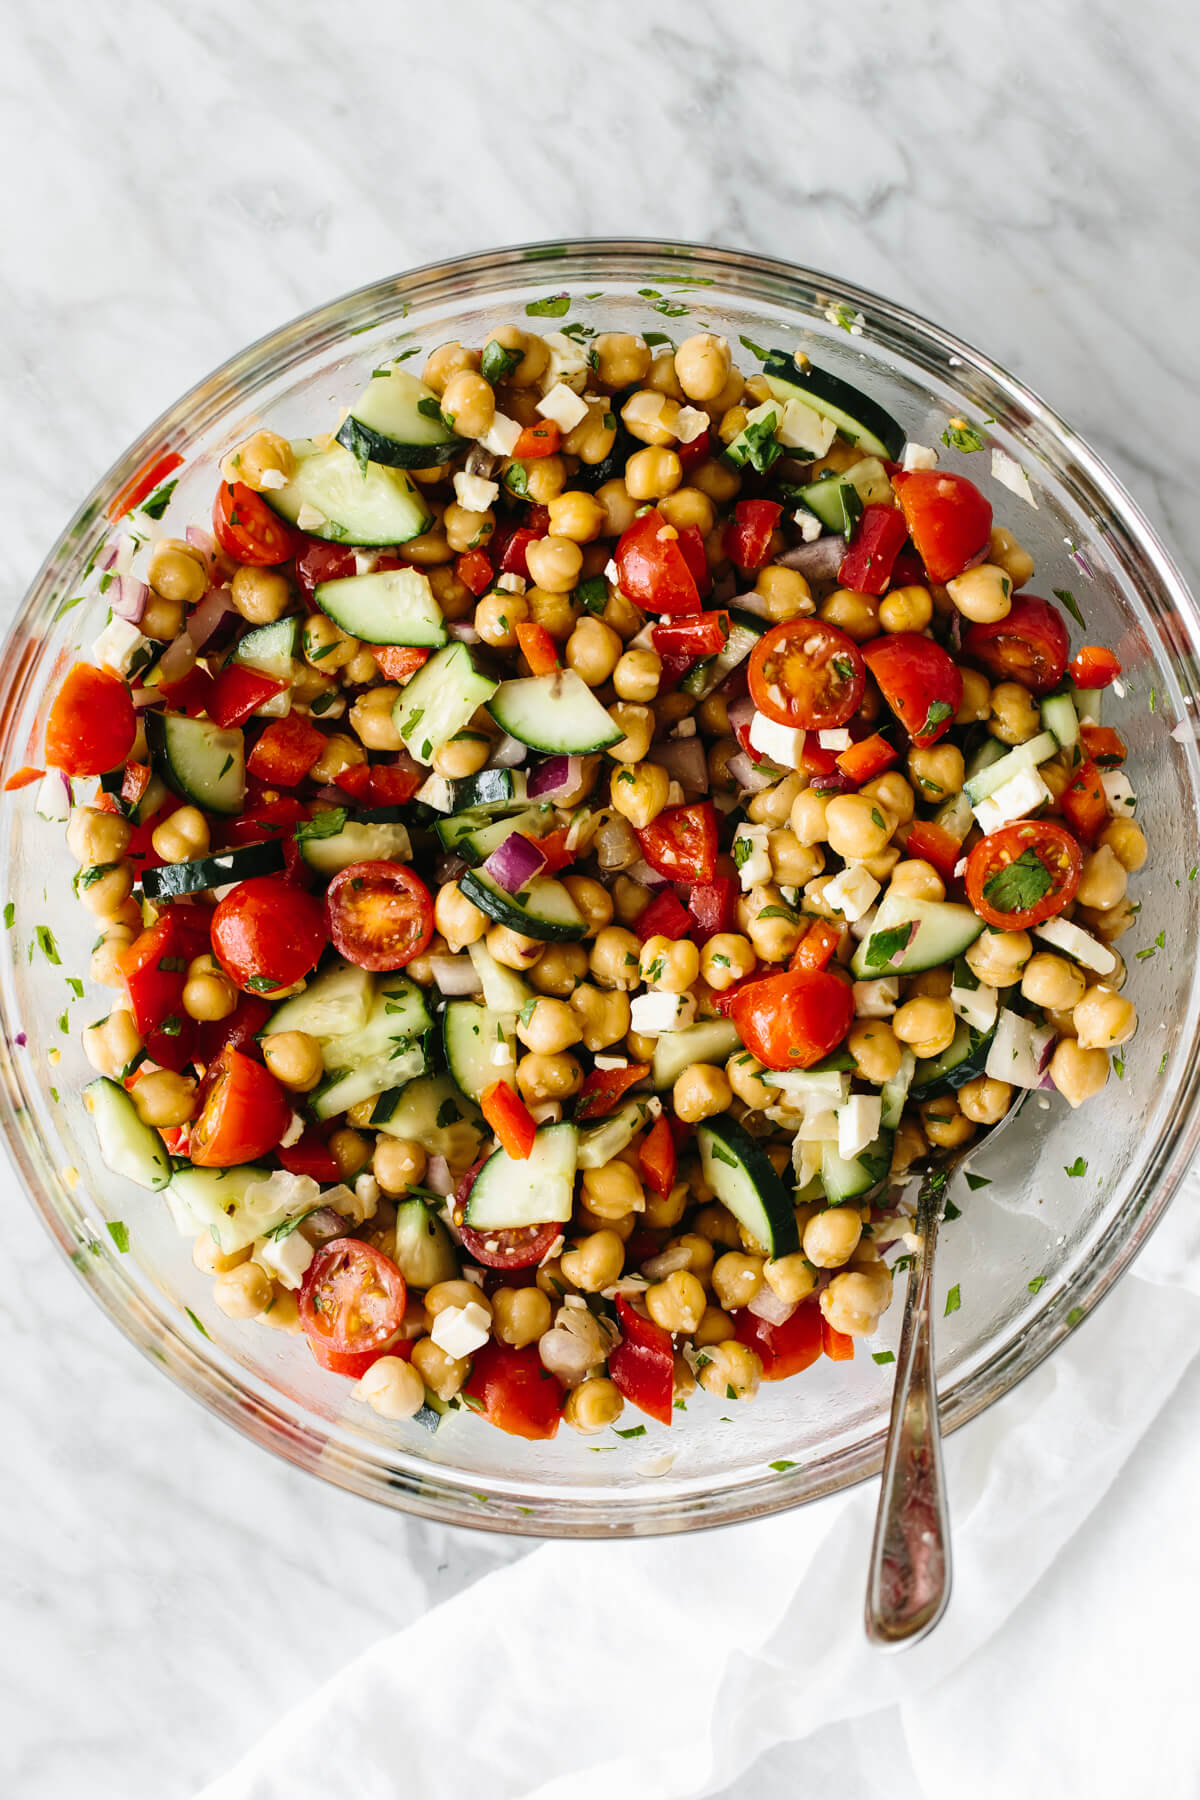 Chickpea salad ingredients mixed in a bowl